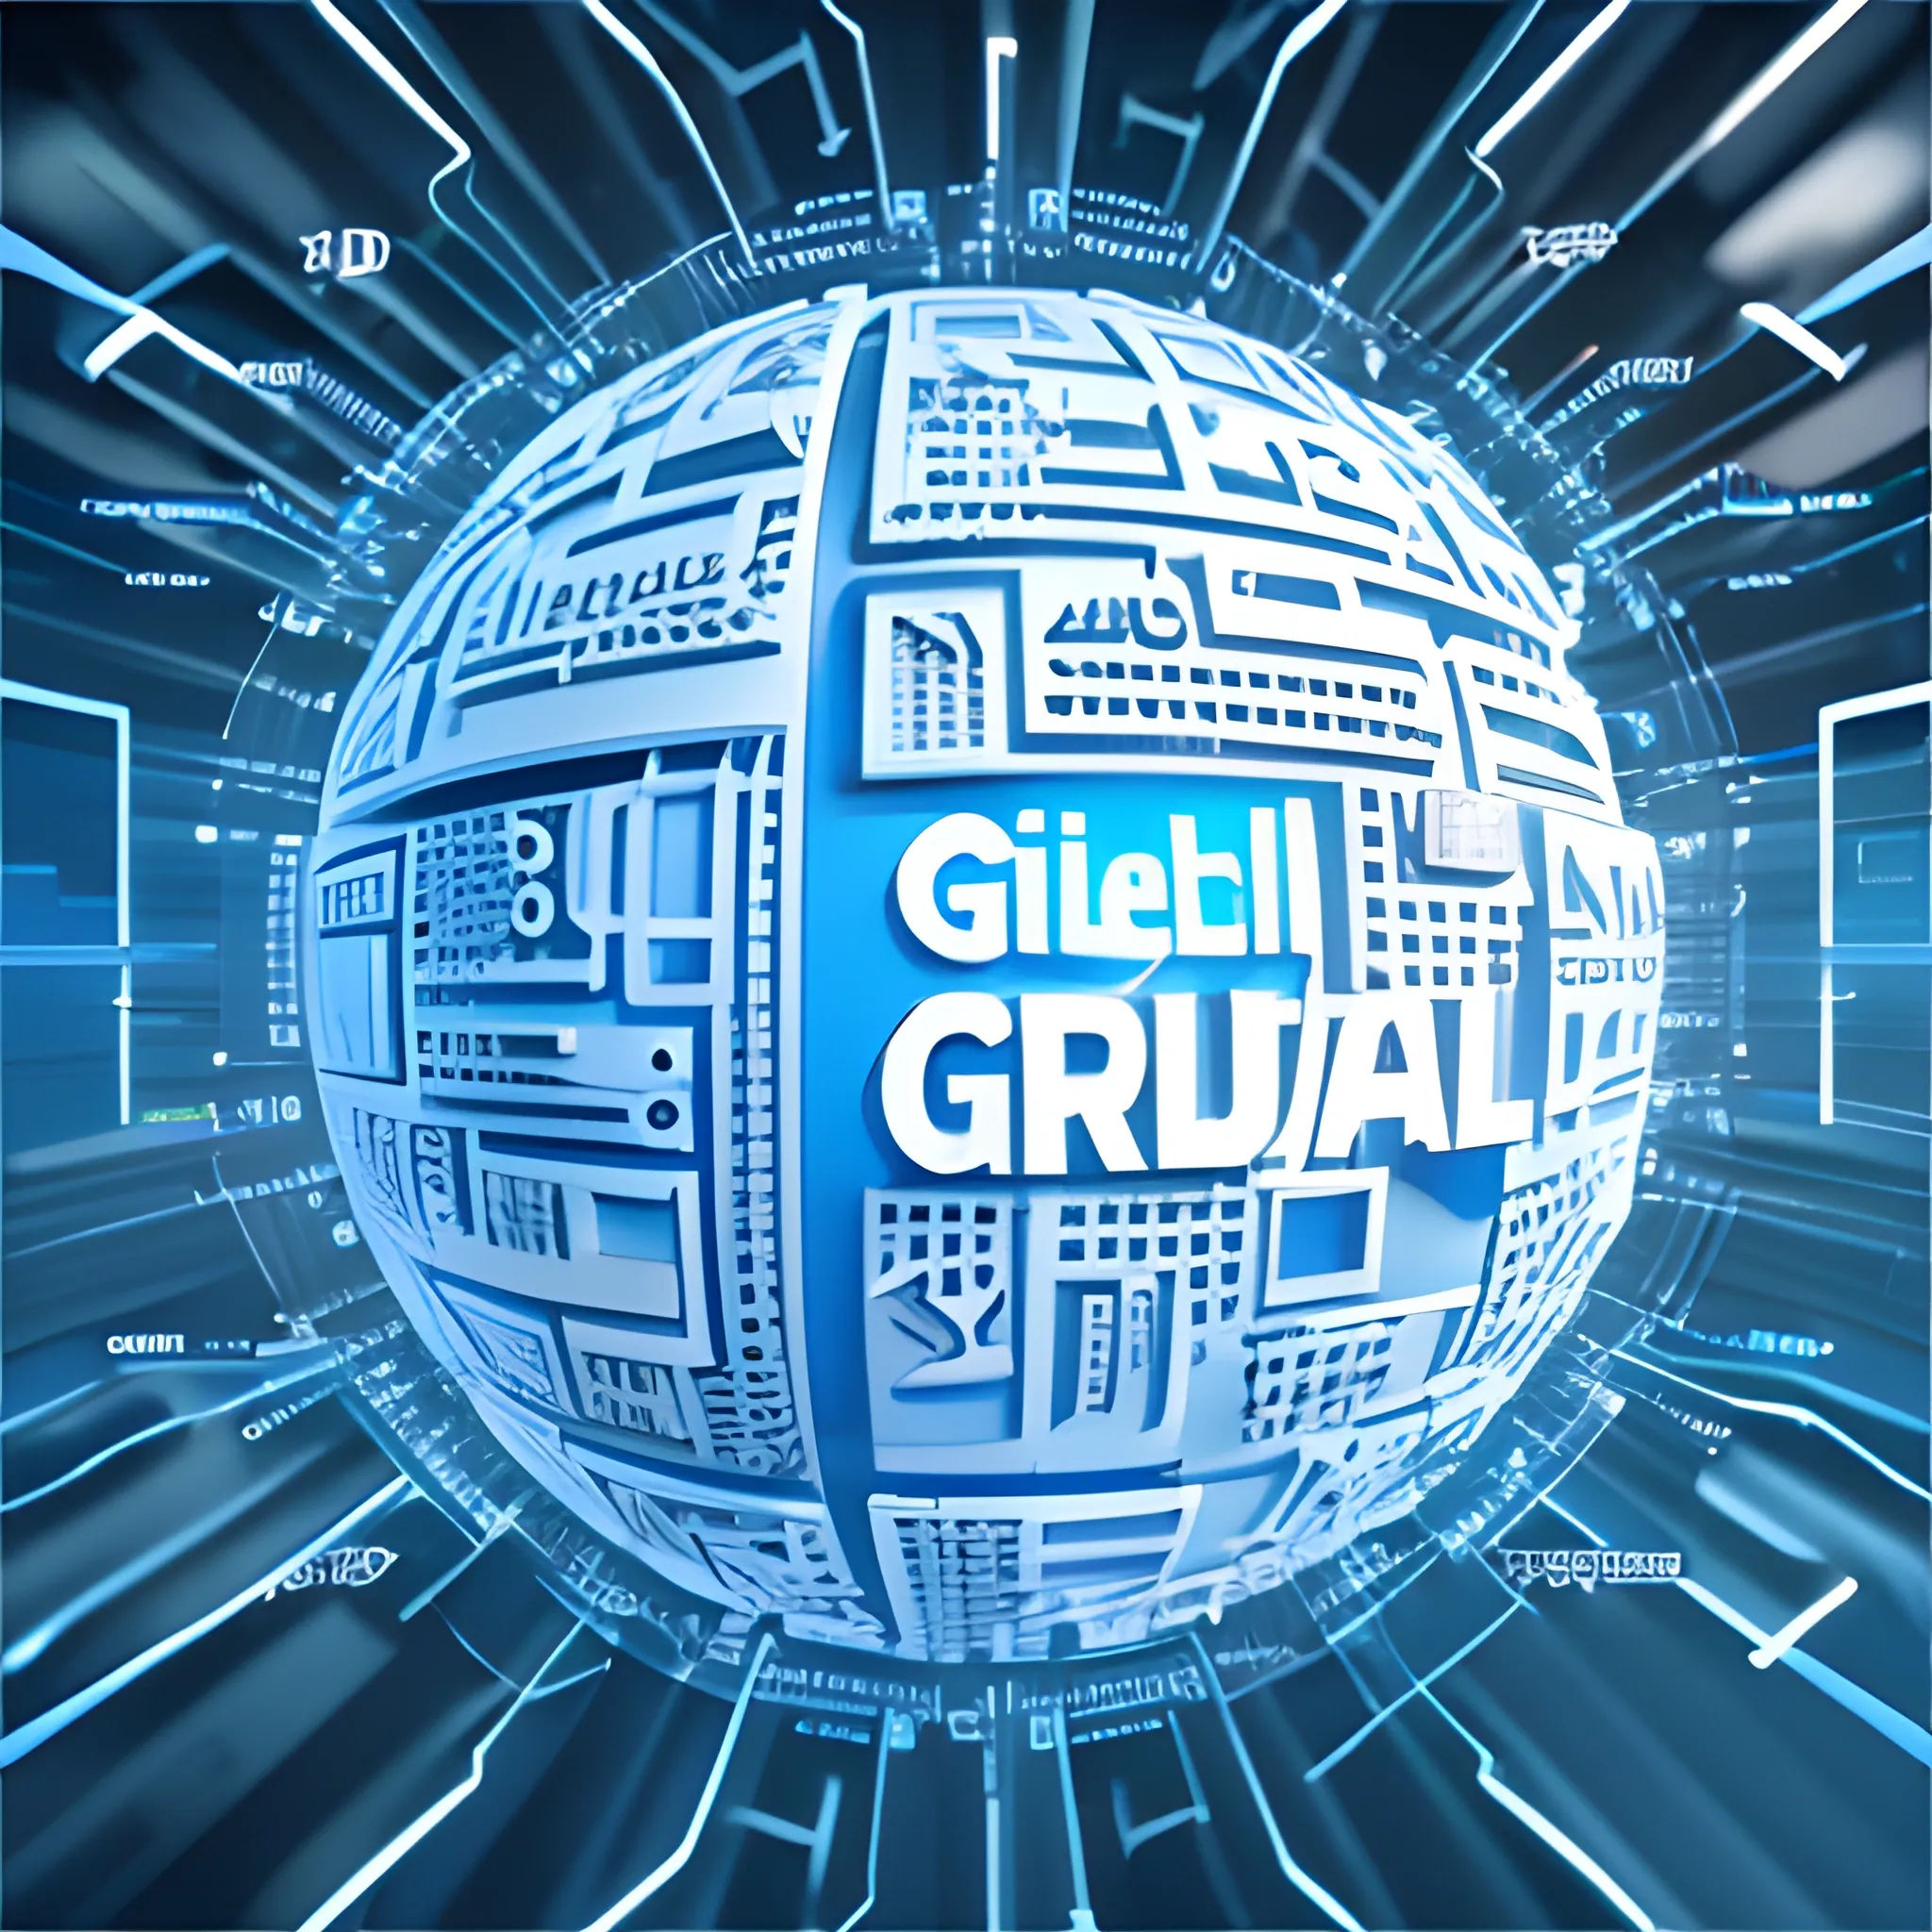 3D IT logo, modern and connected to artificial intelligence, with the writing: "IT Global Infrastructure Gerdau"